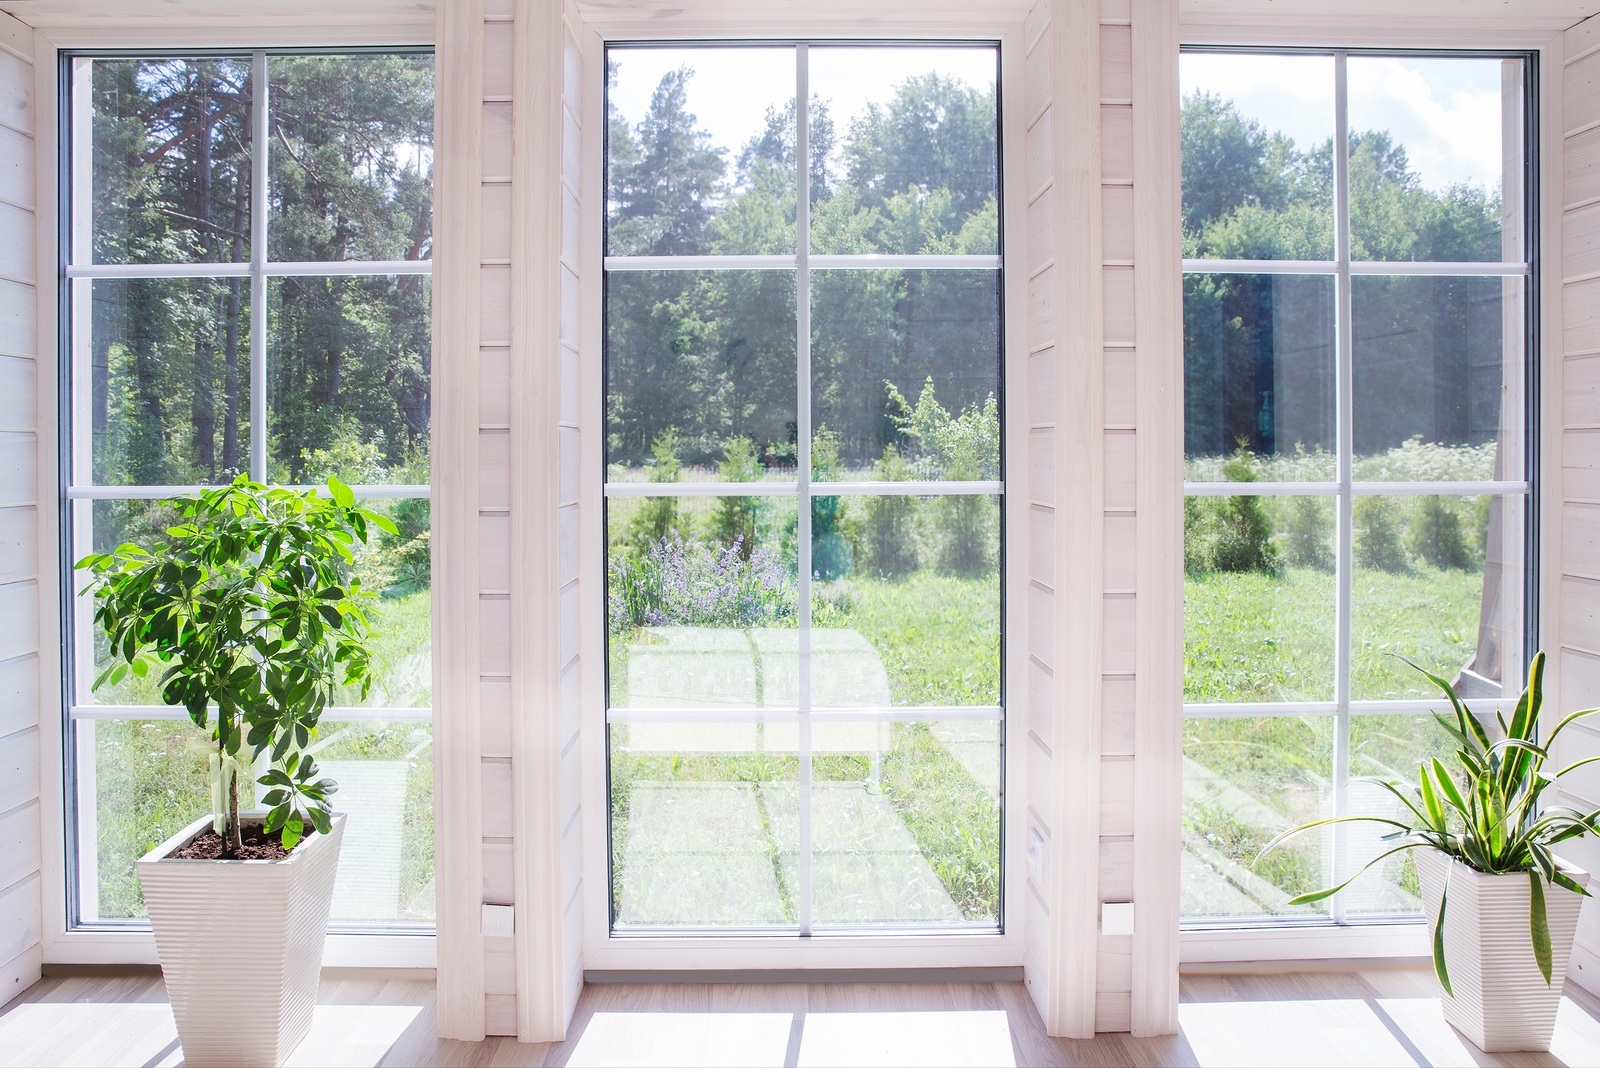 good windows help greatly reduce your monthly costs